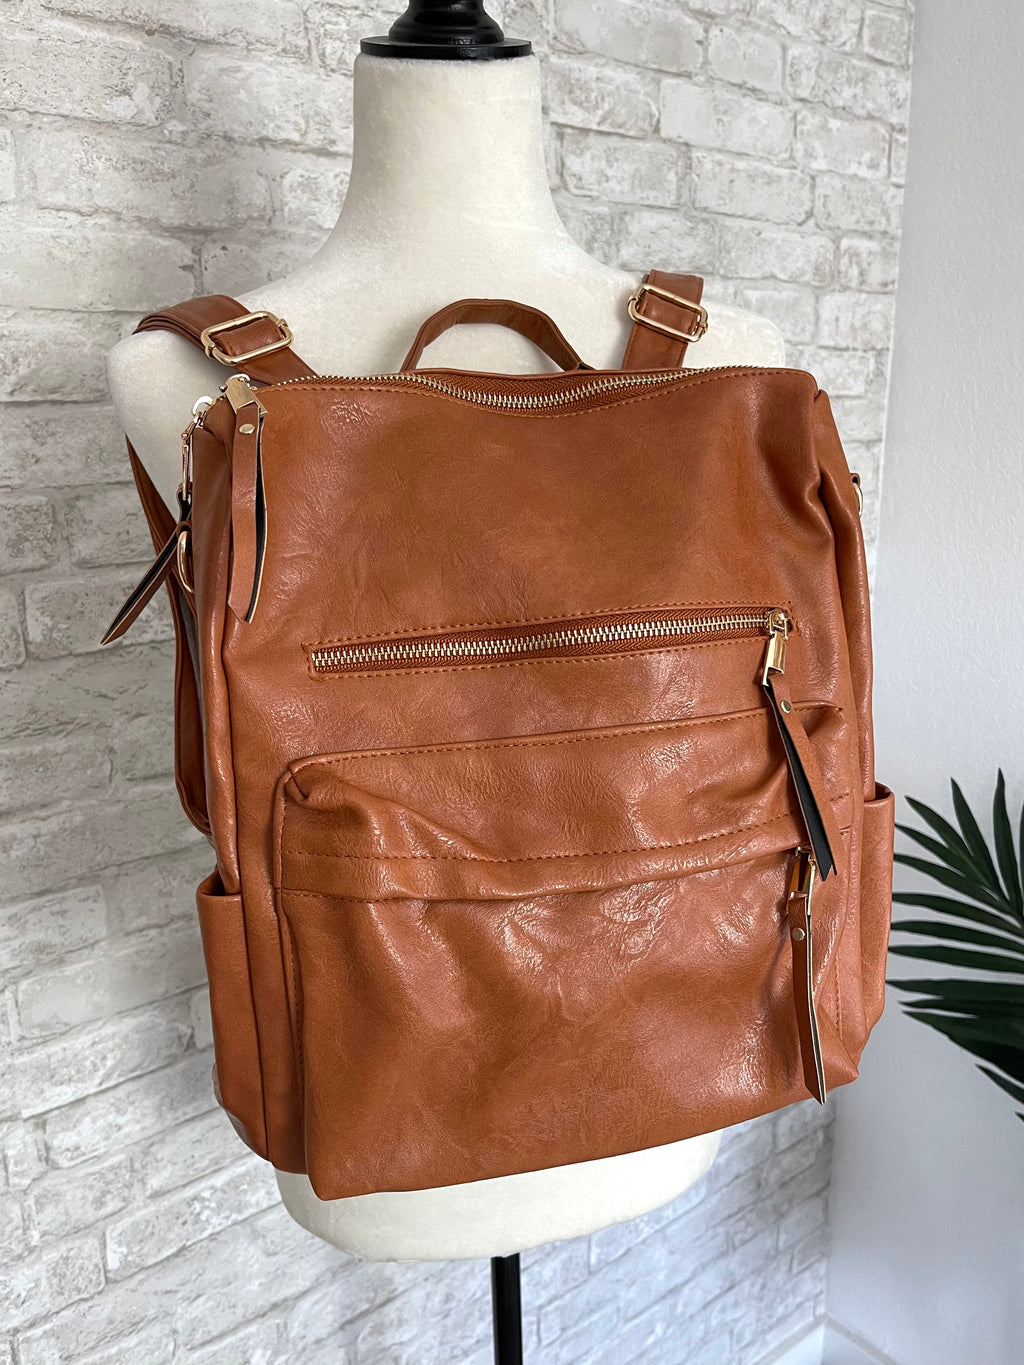 Brielle Convertible Backpack Review in Camel